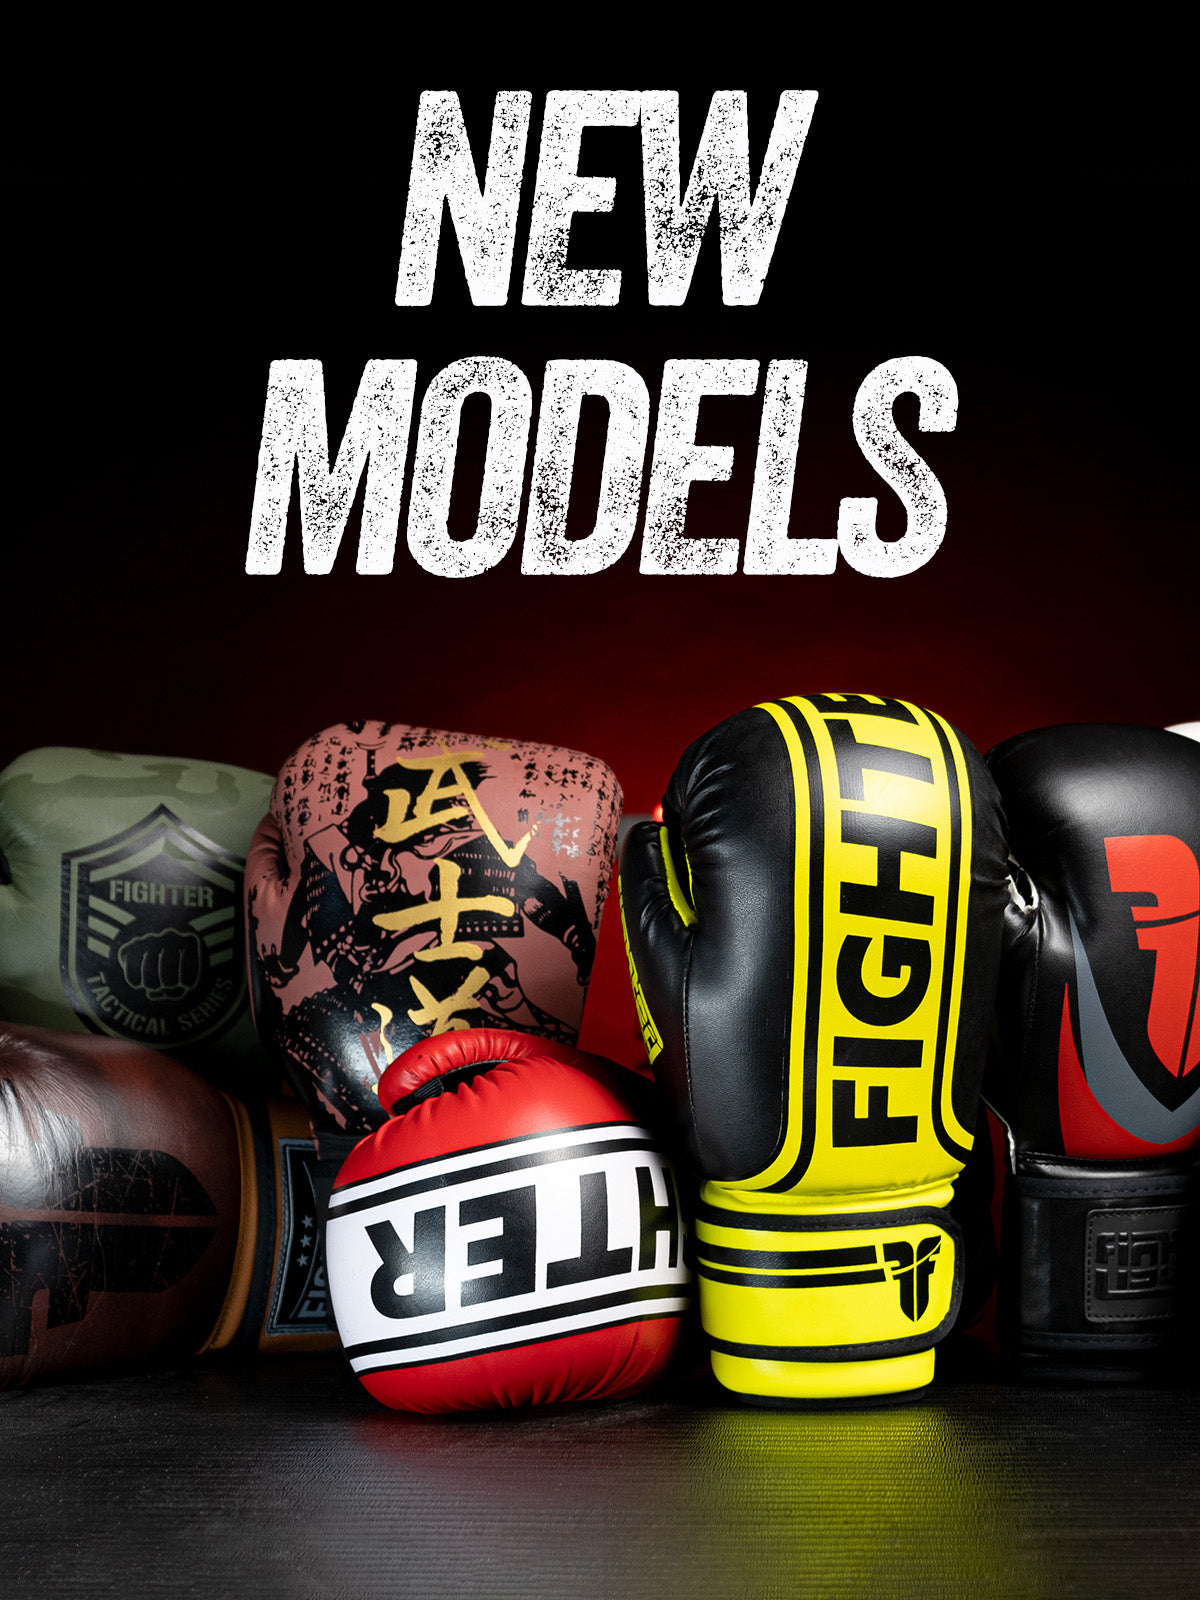 Fighters Market Wholesale Europe -  – Fighters